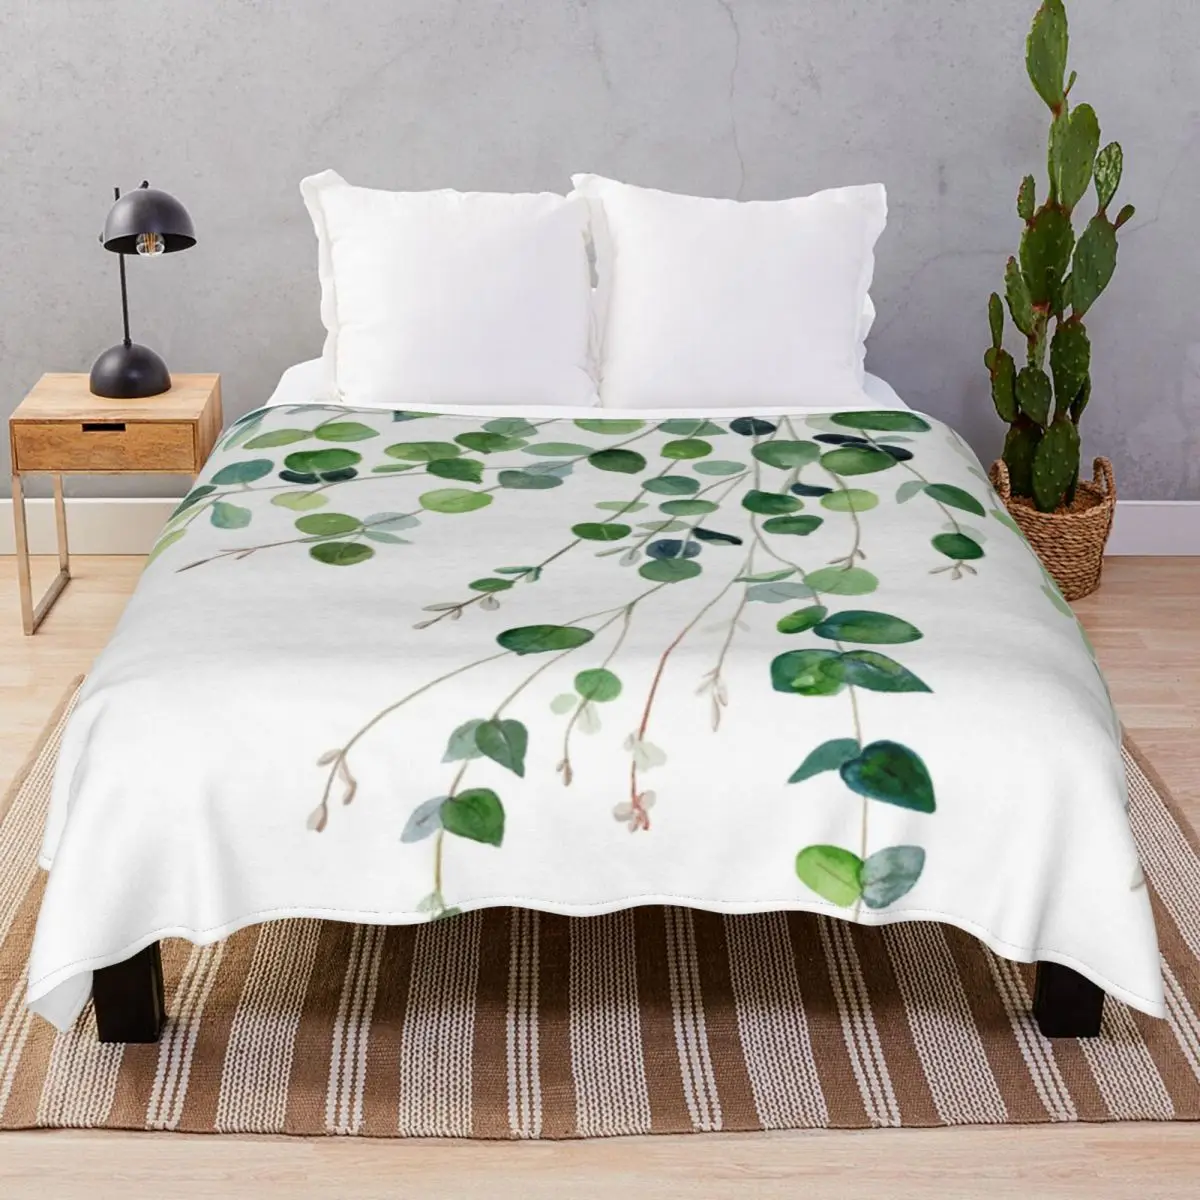 Eucalyptus Watercolor Blanket Fleece Spring/Autumn Warm Throw Blankets for Bedding Home Couch Camp Office